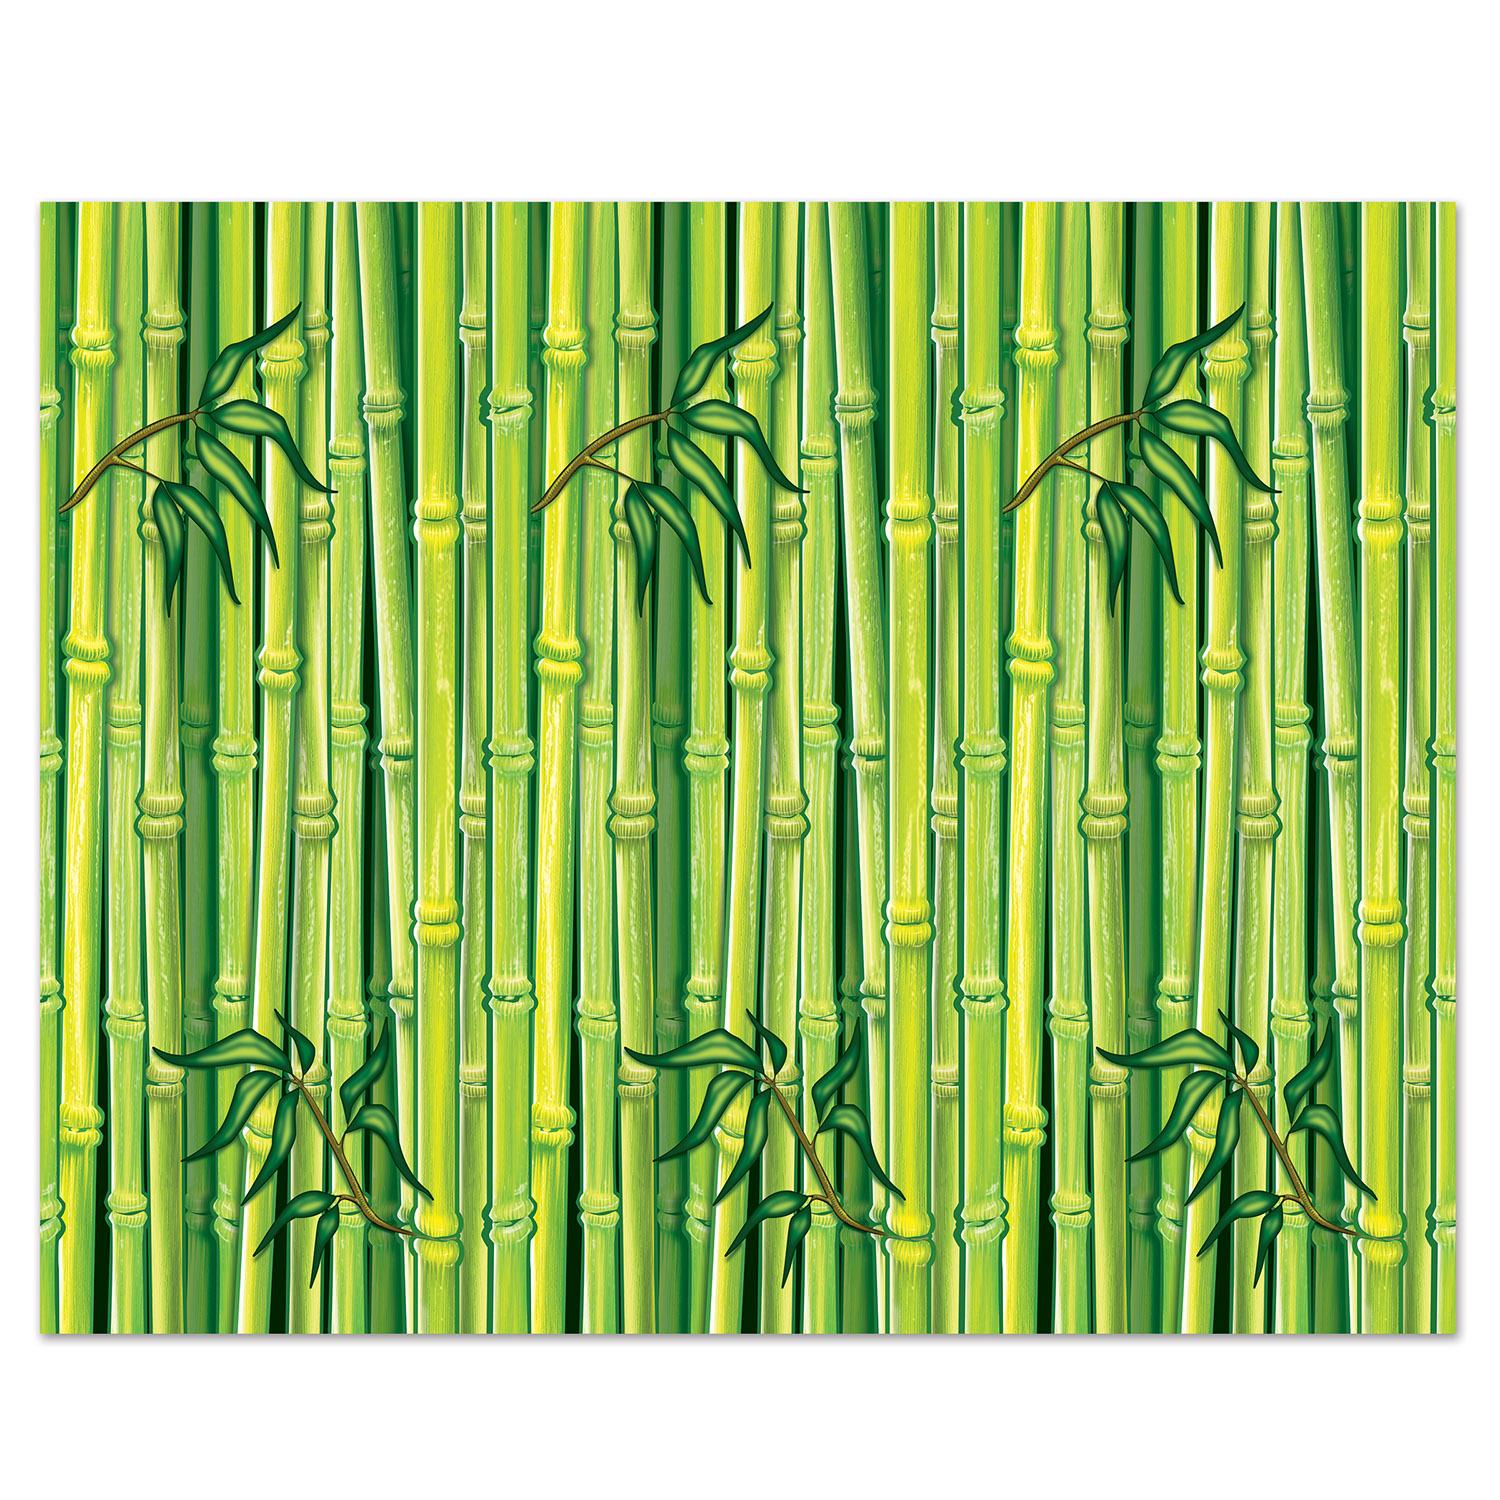 Beistle Bamboo Party Backdrop